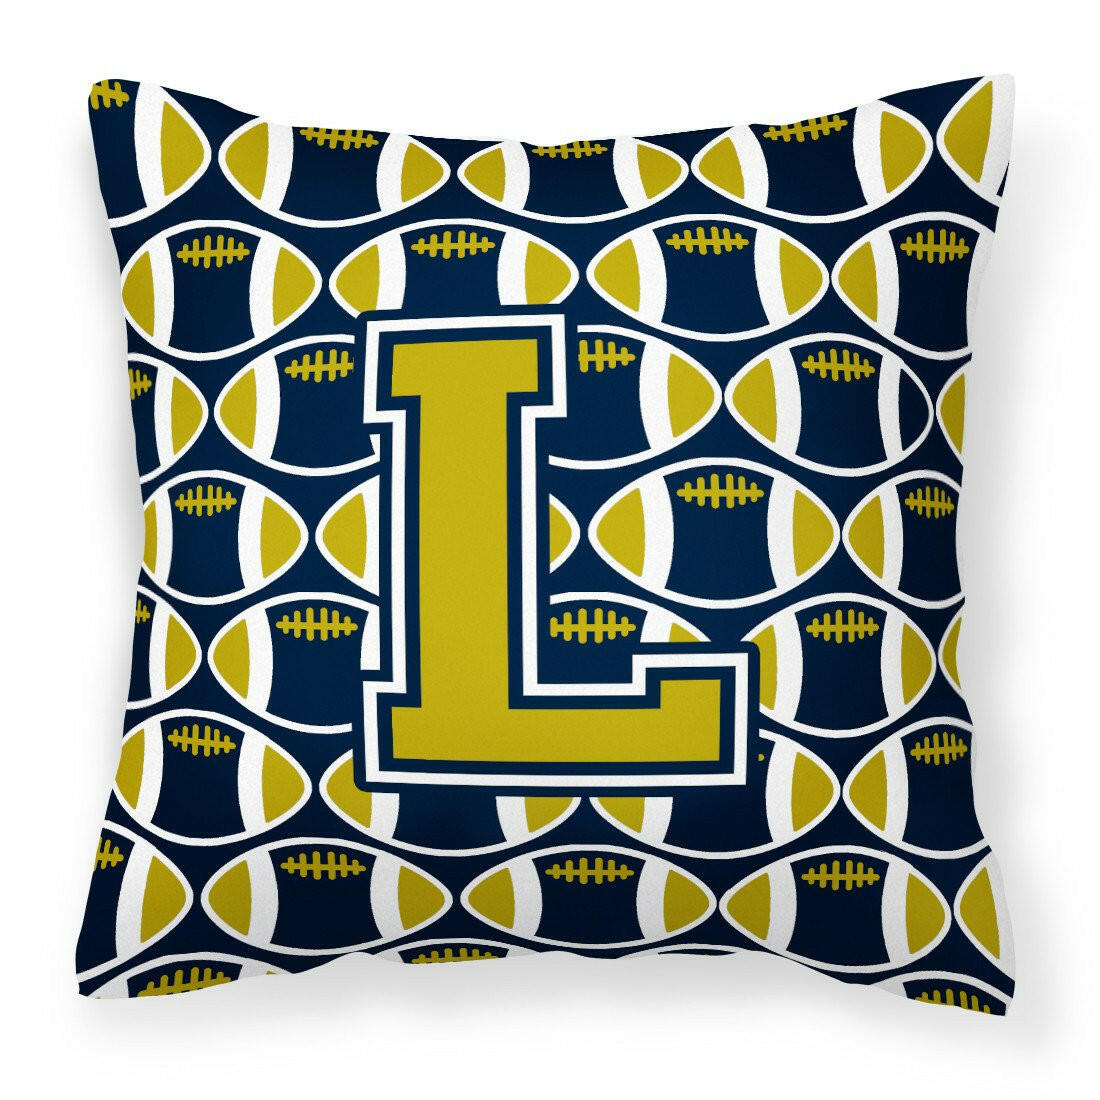 Letter L Football Blue and Gold Fabric Decorative Pillow CJ1074-LPW1414 by Caroline's Treasures